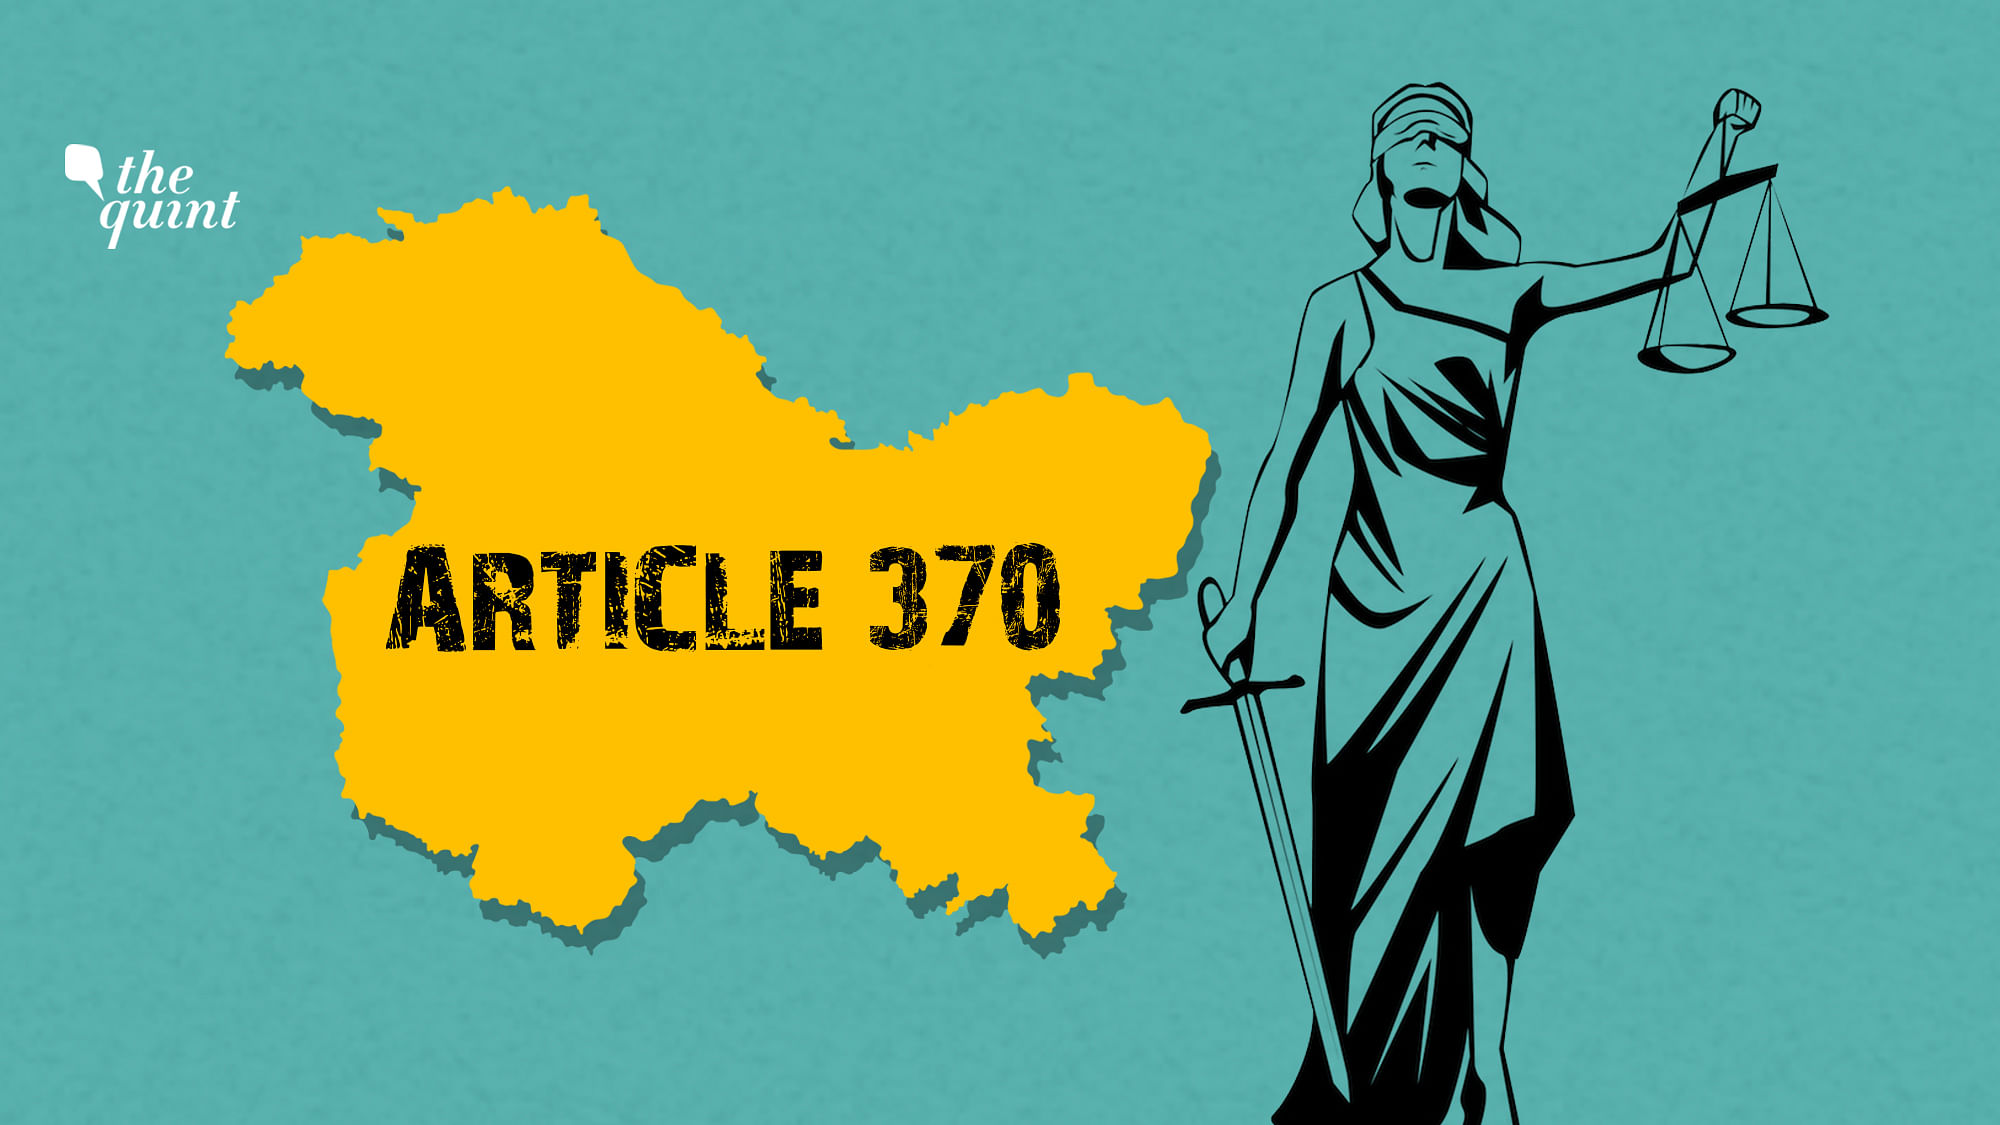 <div class="paragraphs"><p>When India was formally proclaimed as a Republic in January 1950, elements drawn from 306-A were amalgamated into a new constitutional framework under the rubric of <a href="https://www.thequint.com/news/law/article-370-abrogation-supreme-court-hearing-who-are-the-petitioners-latest-update">Article 370.</a></p></div>